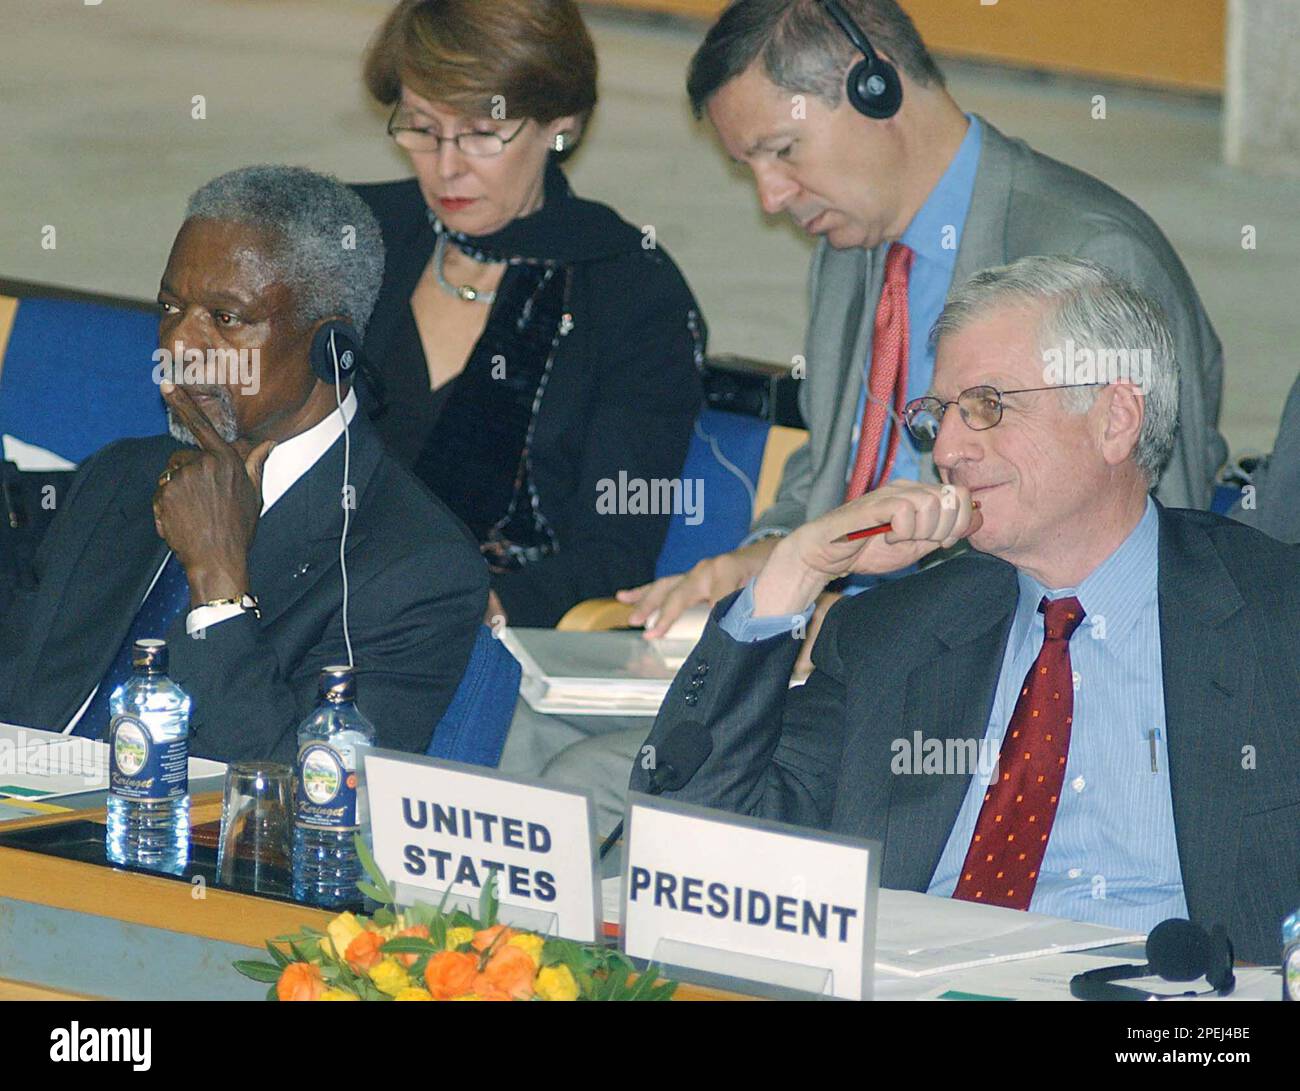 United Nations Secretary General, Kofi Annan, left, and USA Ambassador to the United Nations, John Danforth, right, listen as John Garang, Chairman Sudan Peoples Liberation Army (not in picture), speaks during the opening of the UN Security Council Meeting in Nairobi, Kenya, Thursday, Nov.18, 2004. (AP Photo/Sayyid Azim) Stock Photo